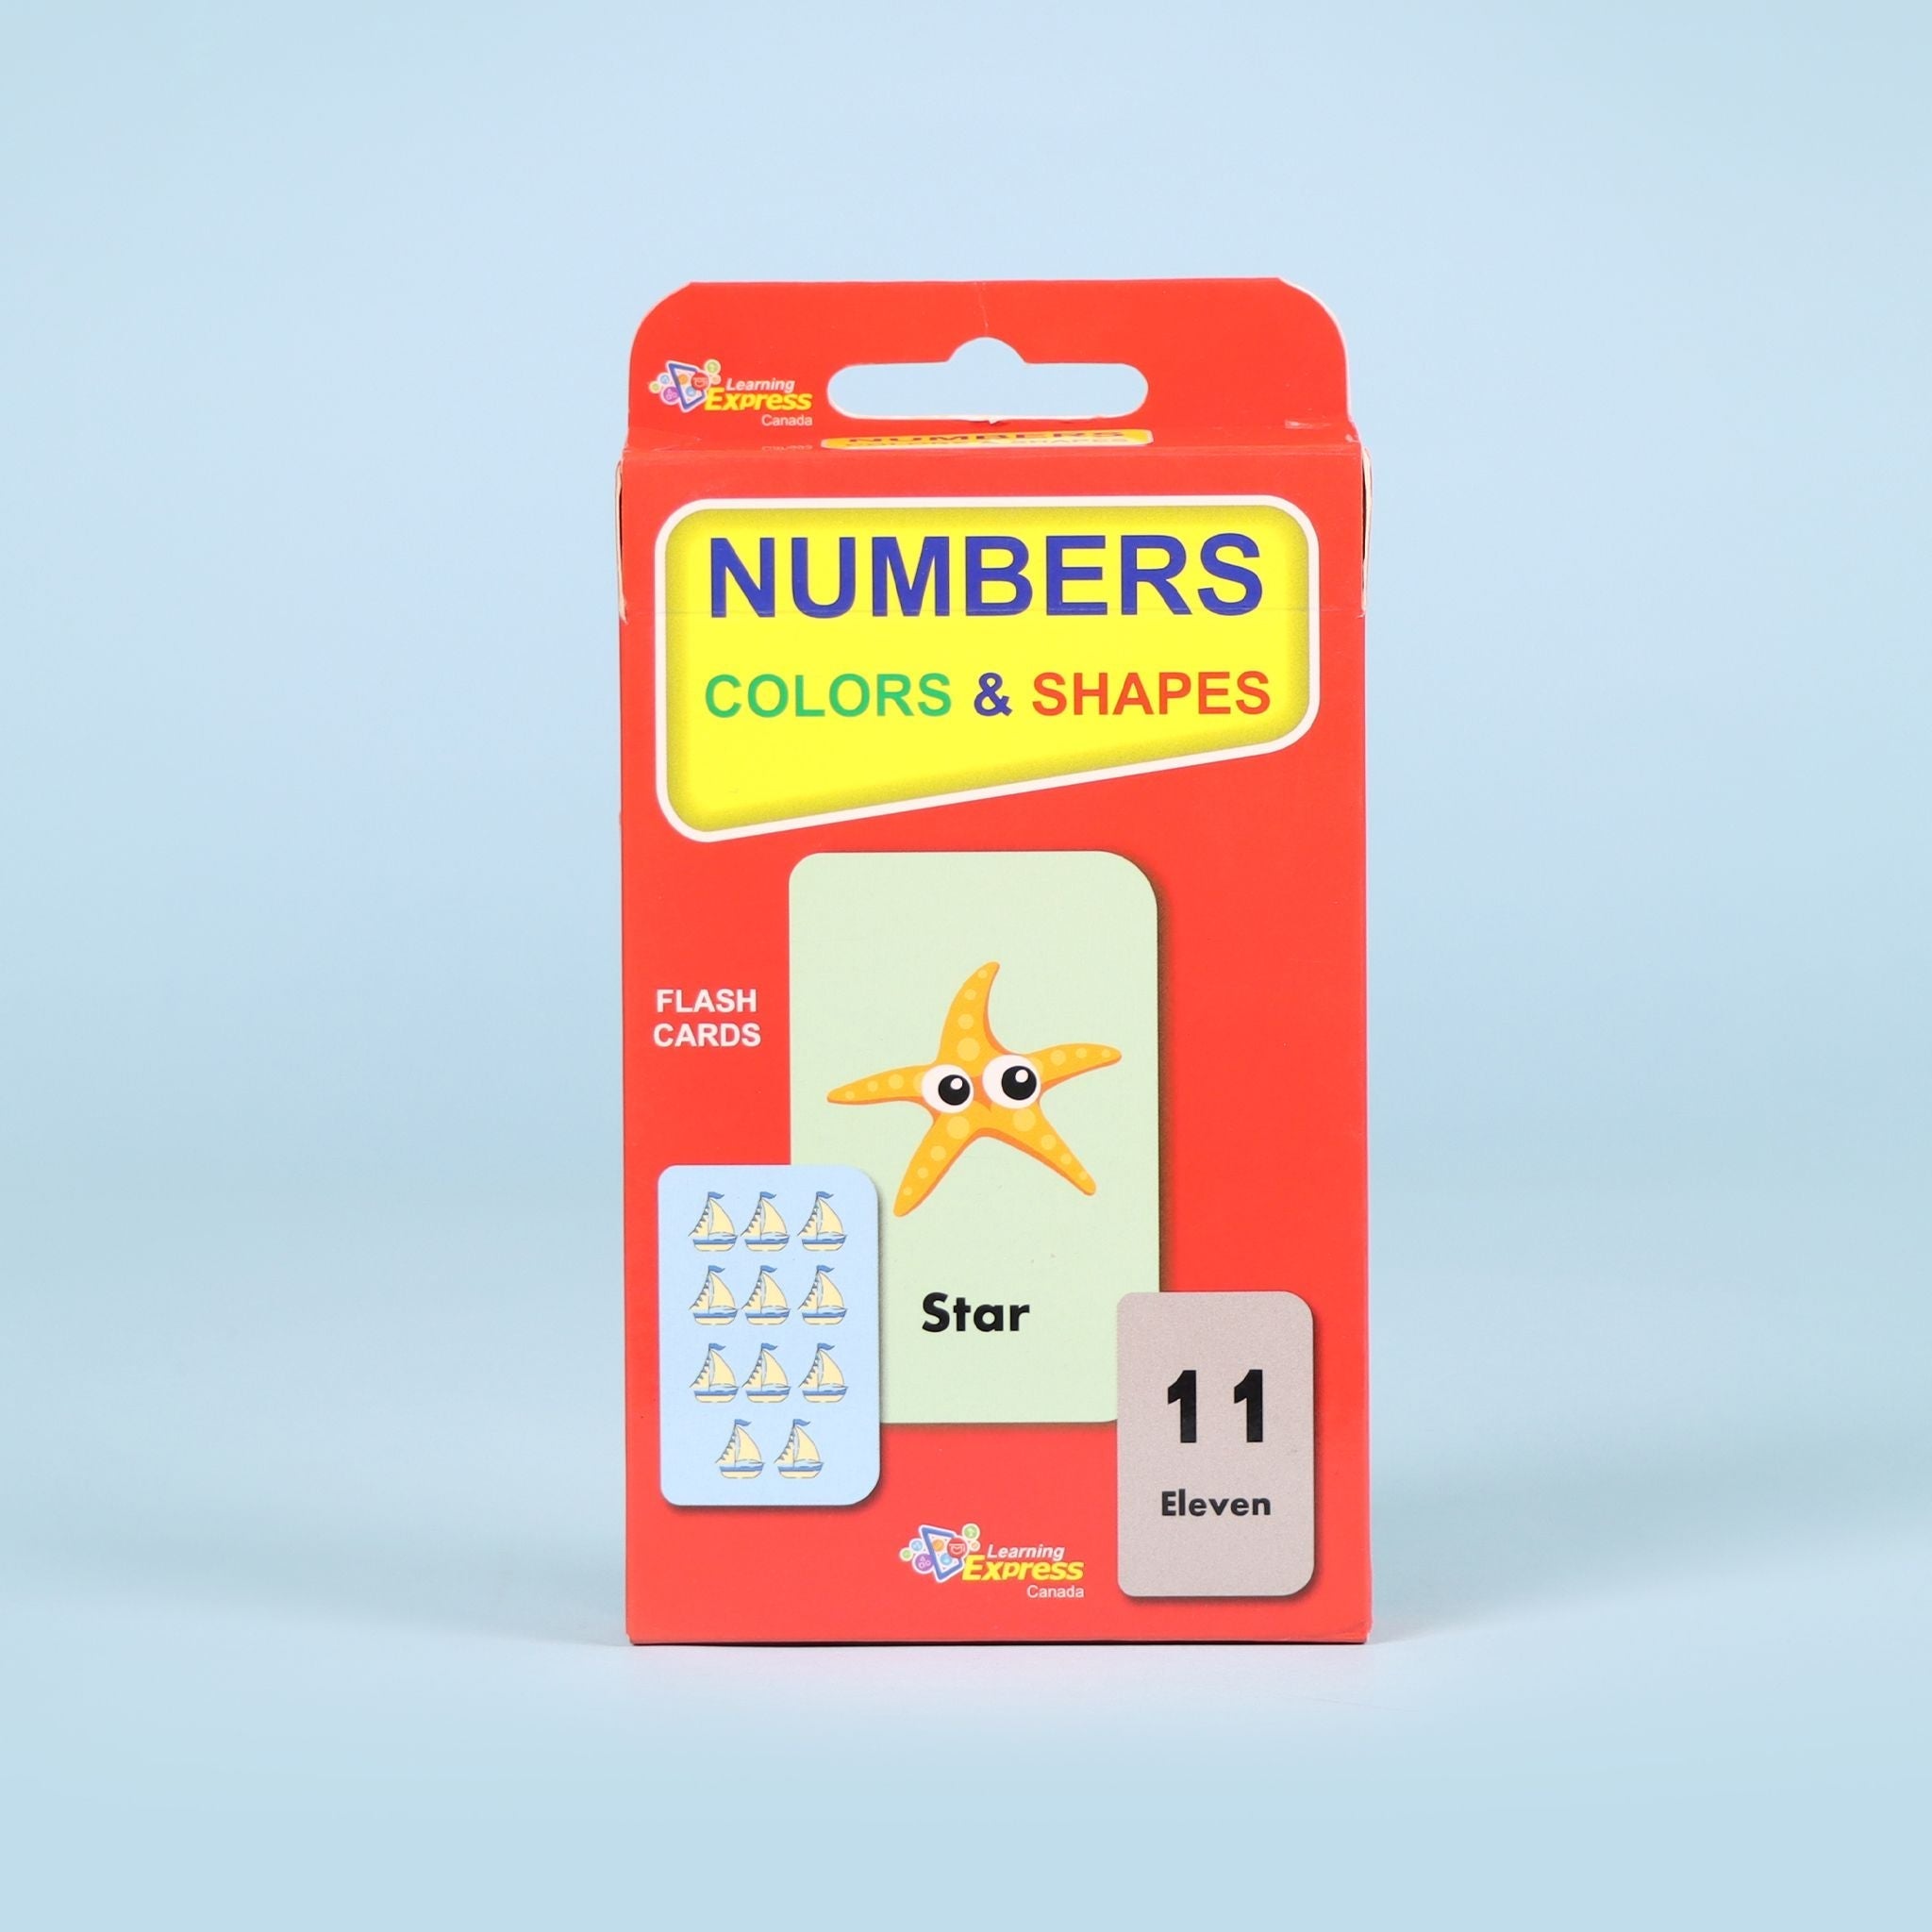 Learning express: Kids Cards (Numbers Colors And Shapes)